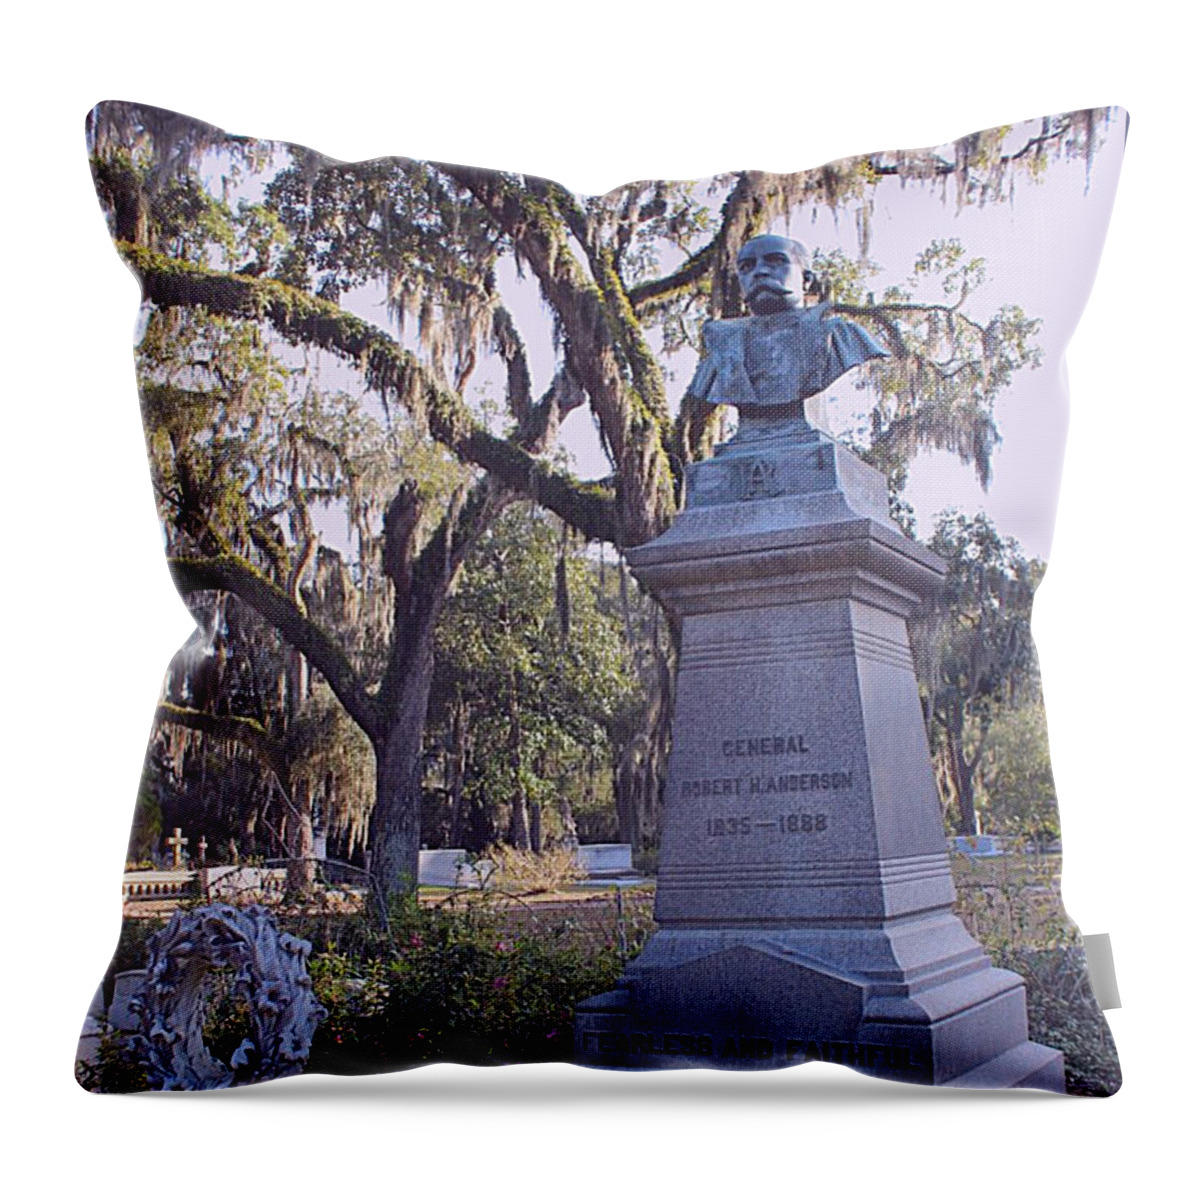 Cemetery Throw Pillow featuring the photograph General Anderson by Lee Darnell